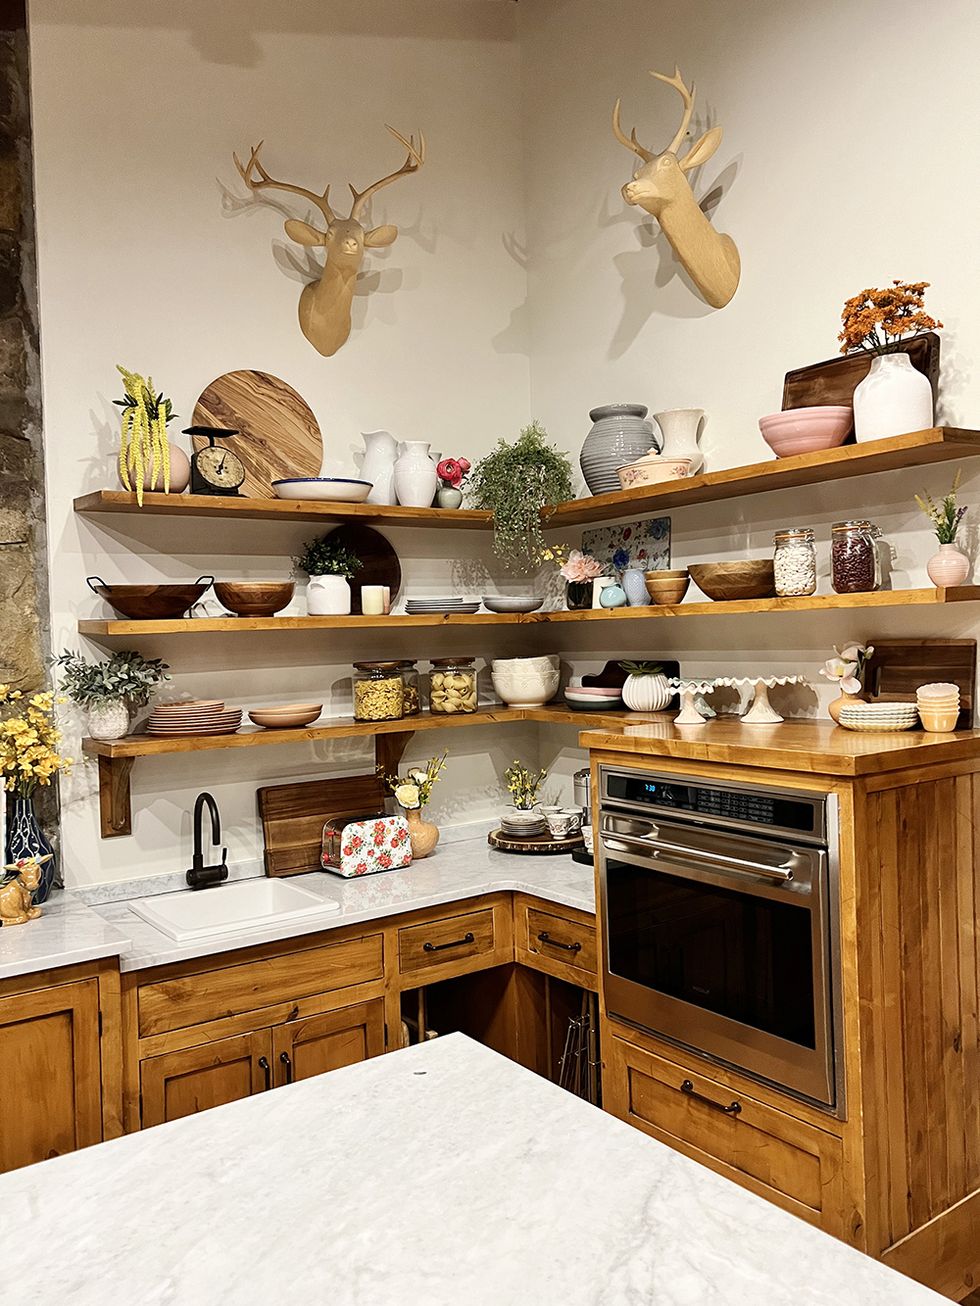 Small Kitchen Design at the Mercantile!